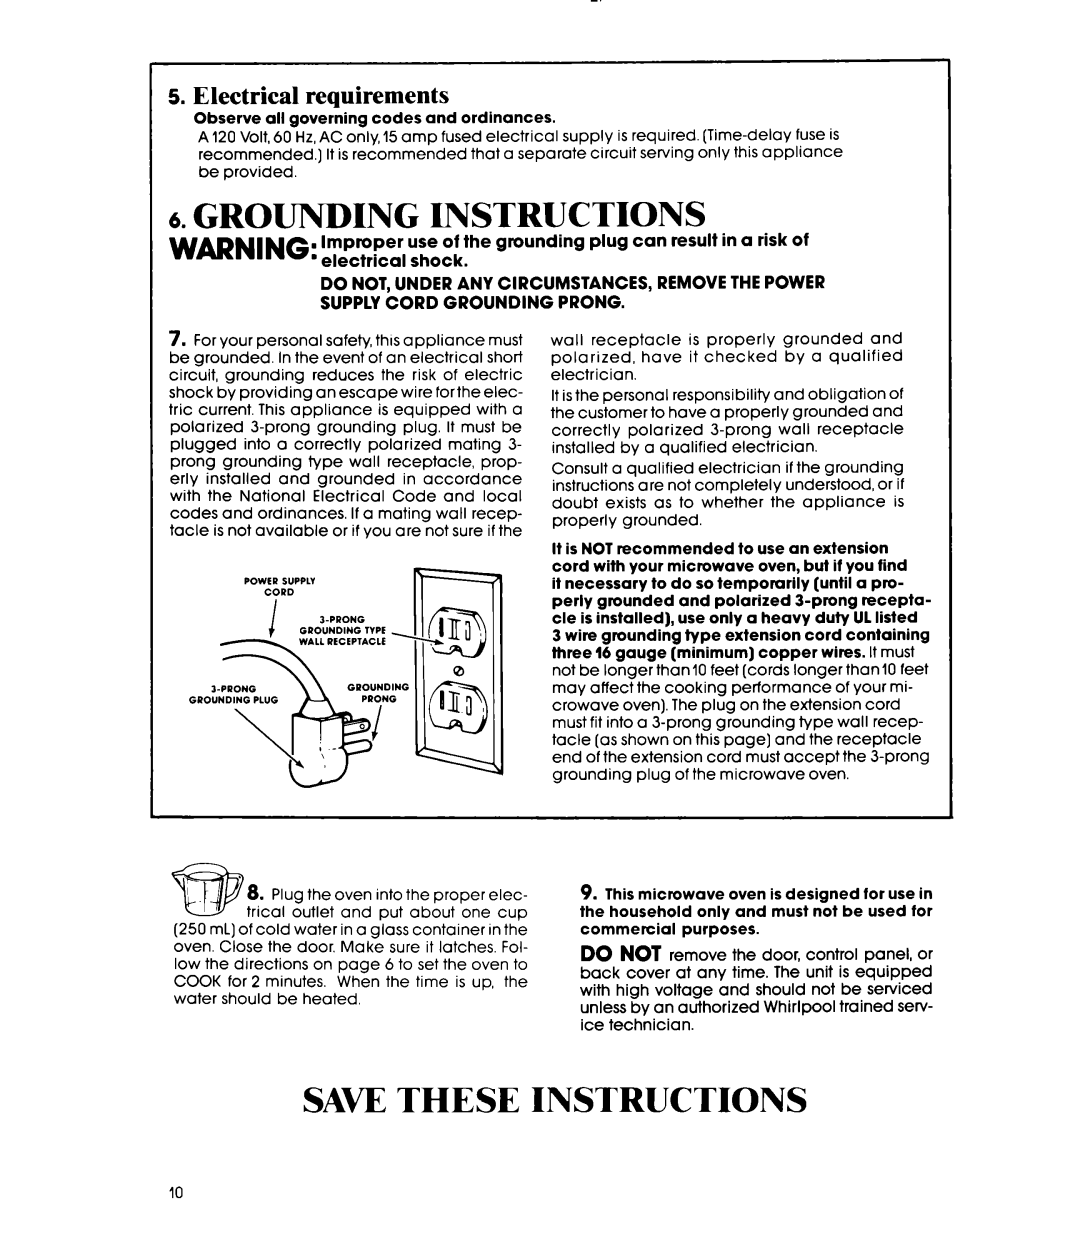 Whirlpool MW1000XP manual Grounding Instructions, Saw These Instructions, Electrical requirements 